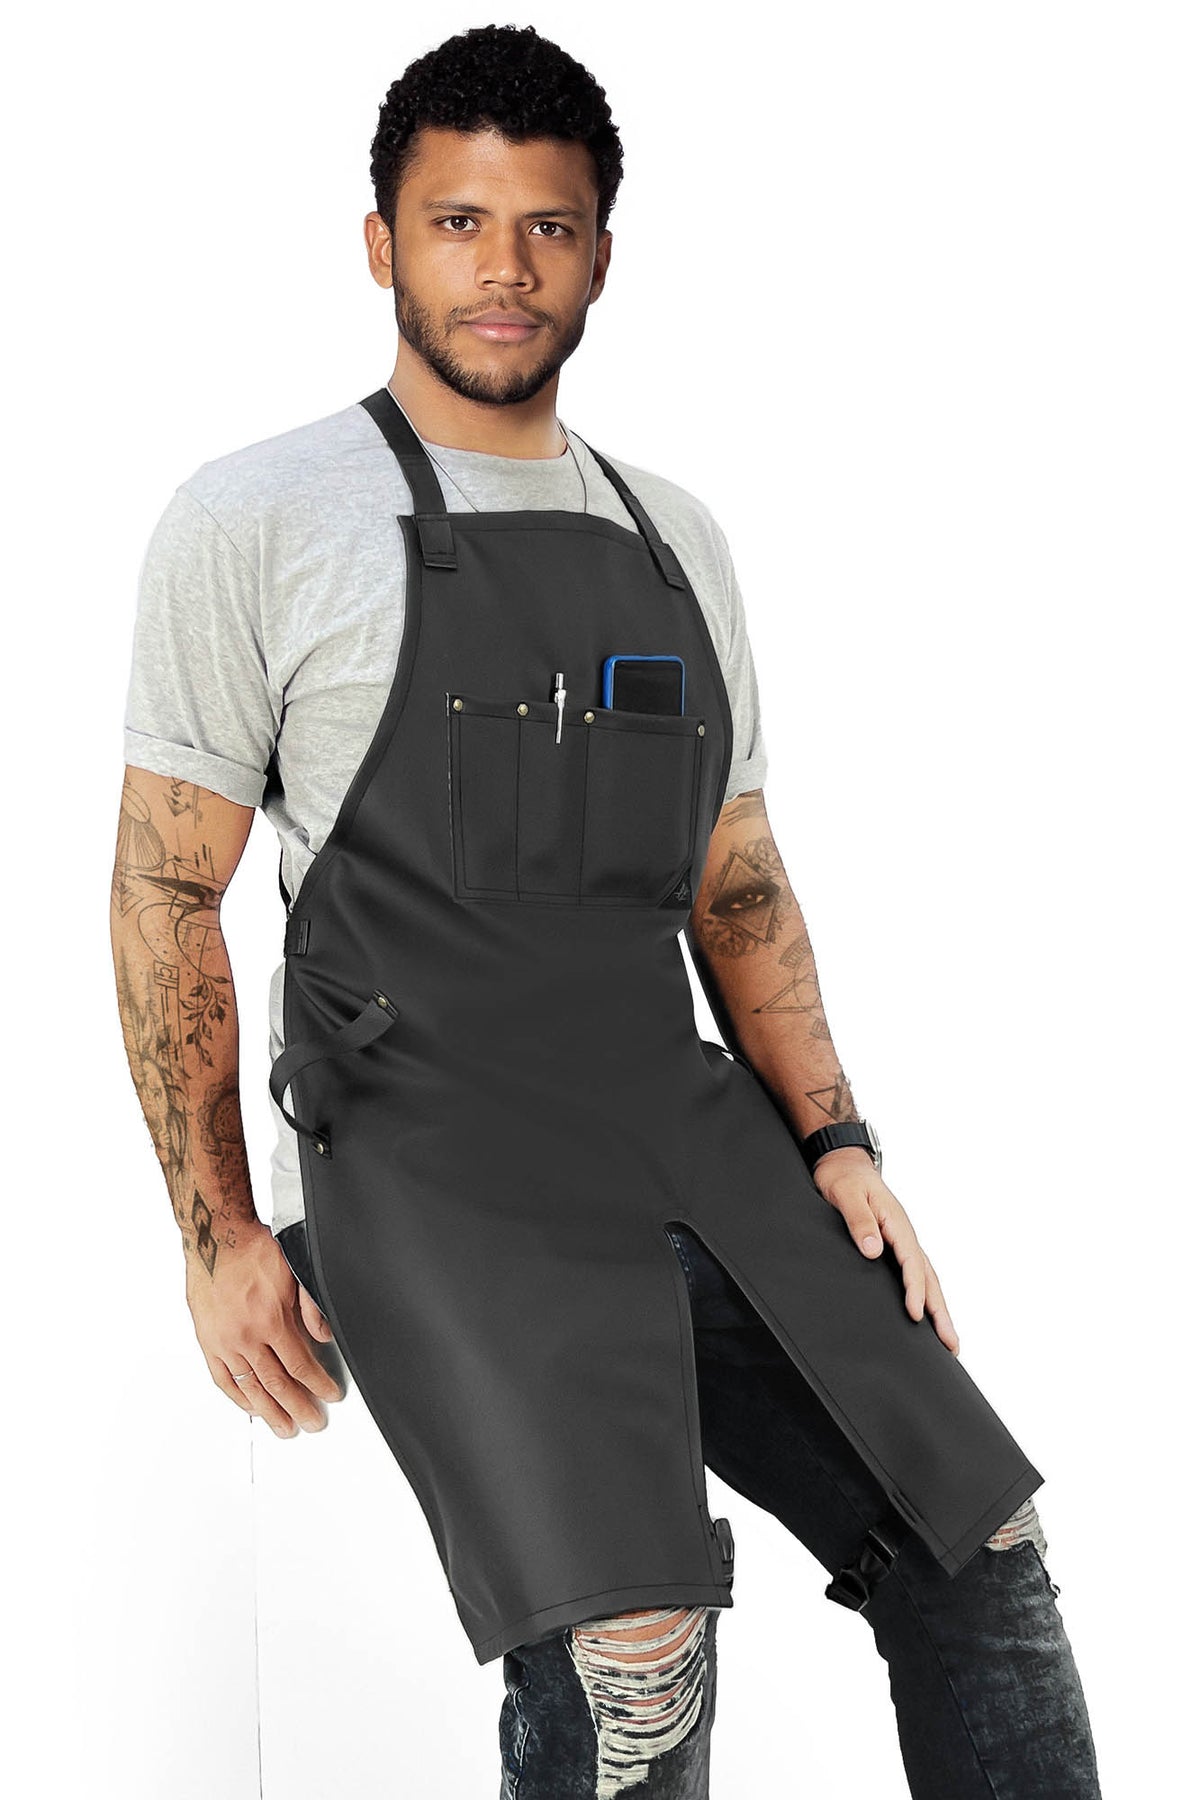 Tattoo Apron - Vegan Leather, Wipeable - Quick-Release Straps - For Tattoo Artist, Tattooist -  Under NY Sky